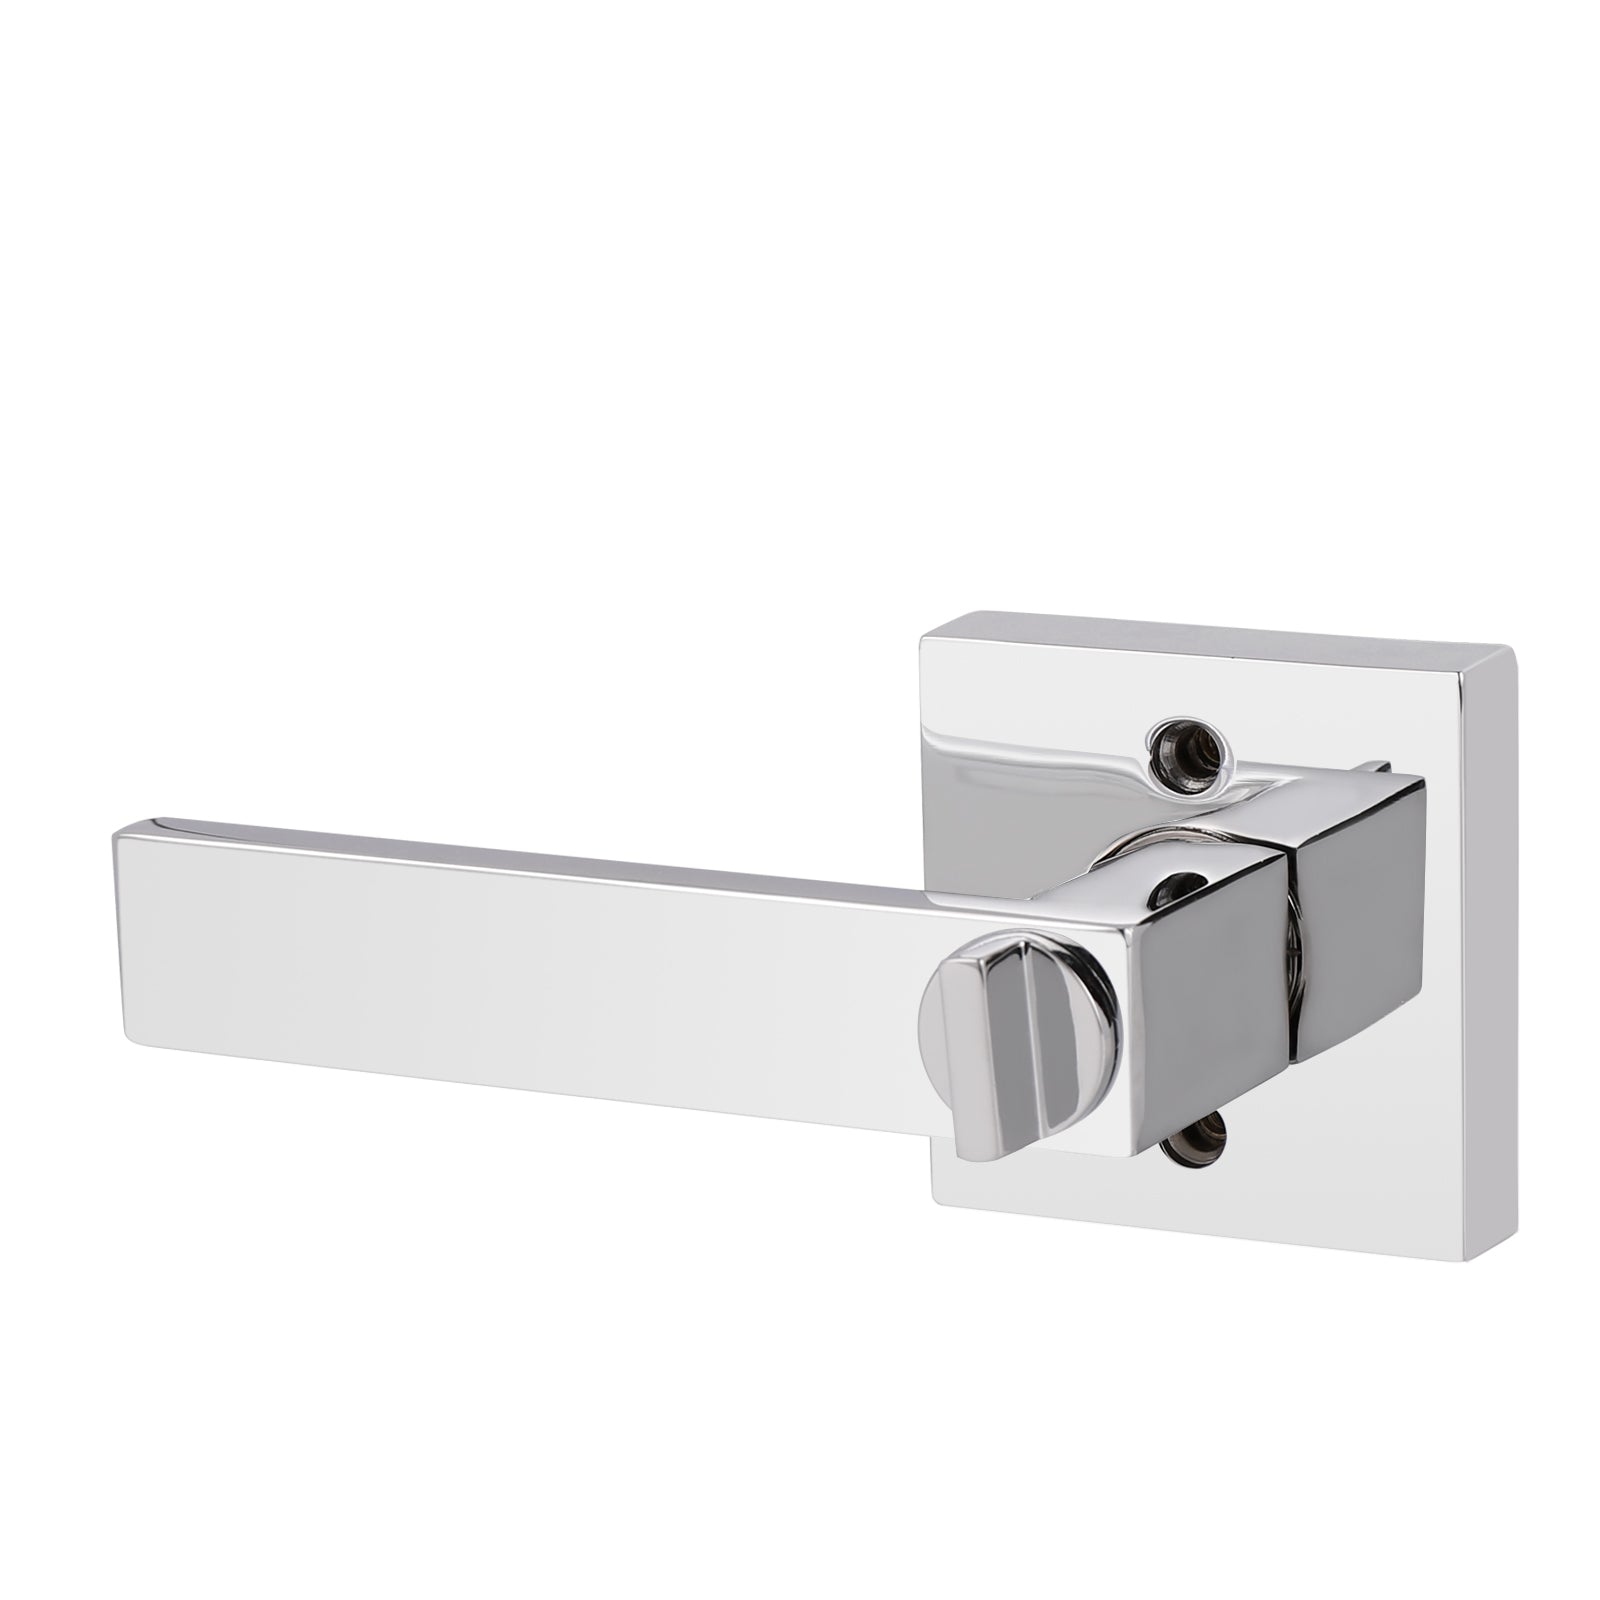 Heavy Duty Privacy Door Handles with Square Design, Polished Chrome Finish DL01PCBK - Probrico